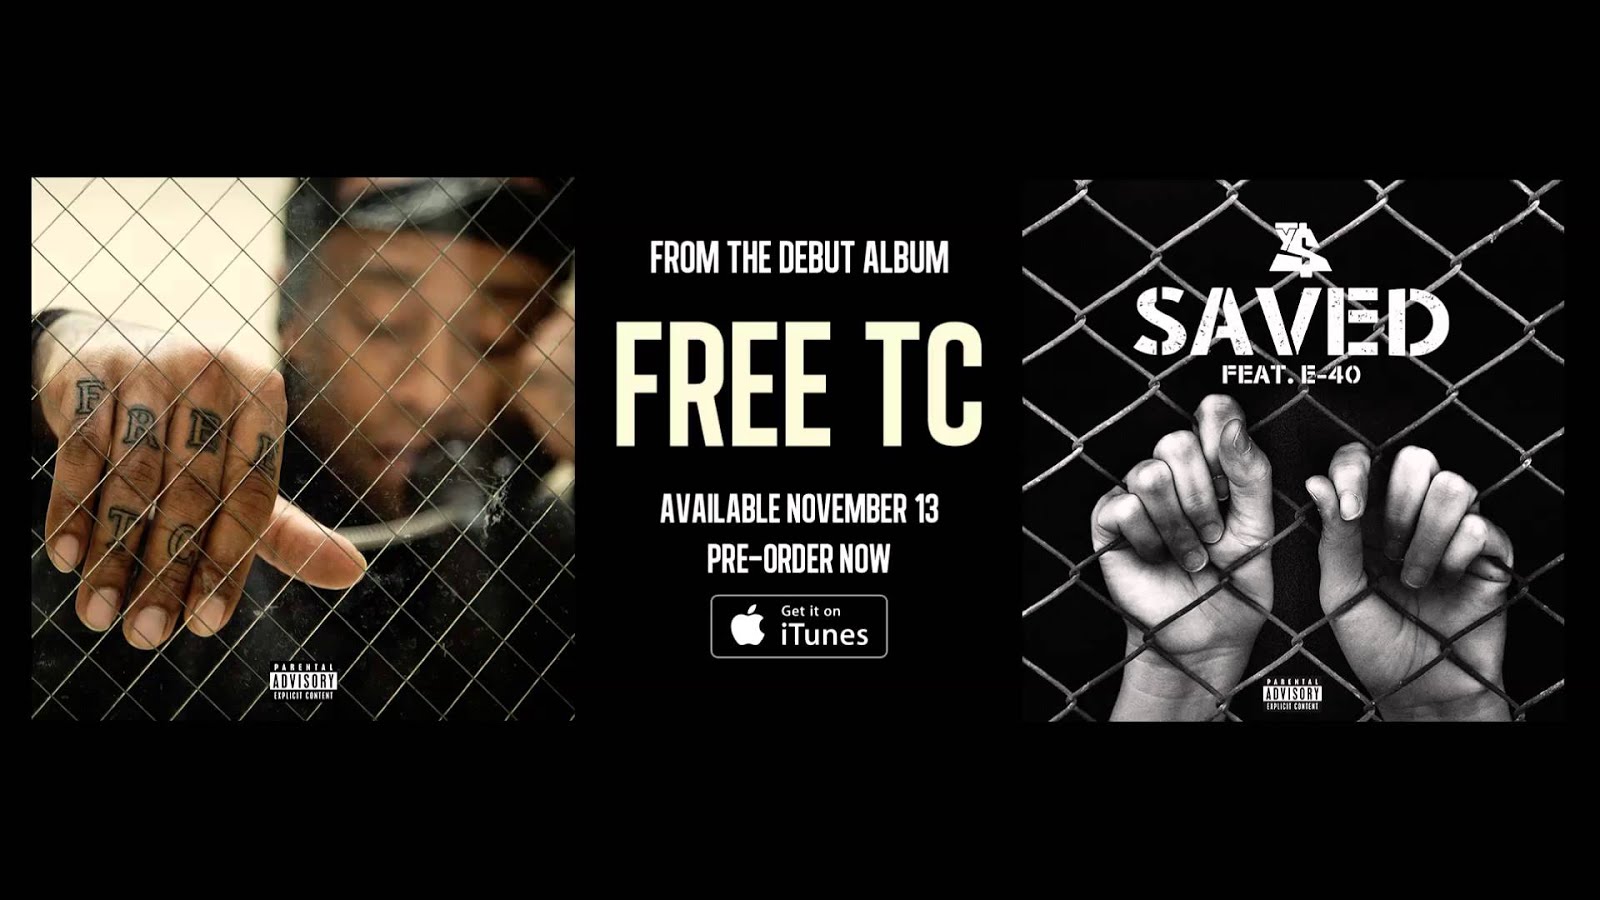 Ty Dolla $ign featuring E-40 - "Saved" (Official Music Video)